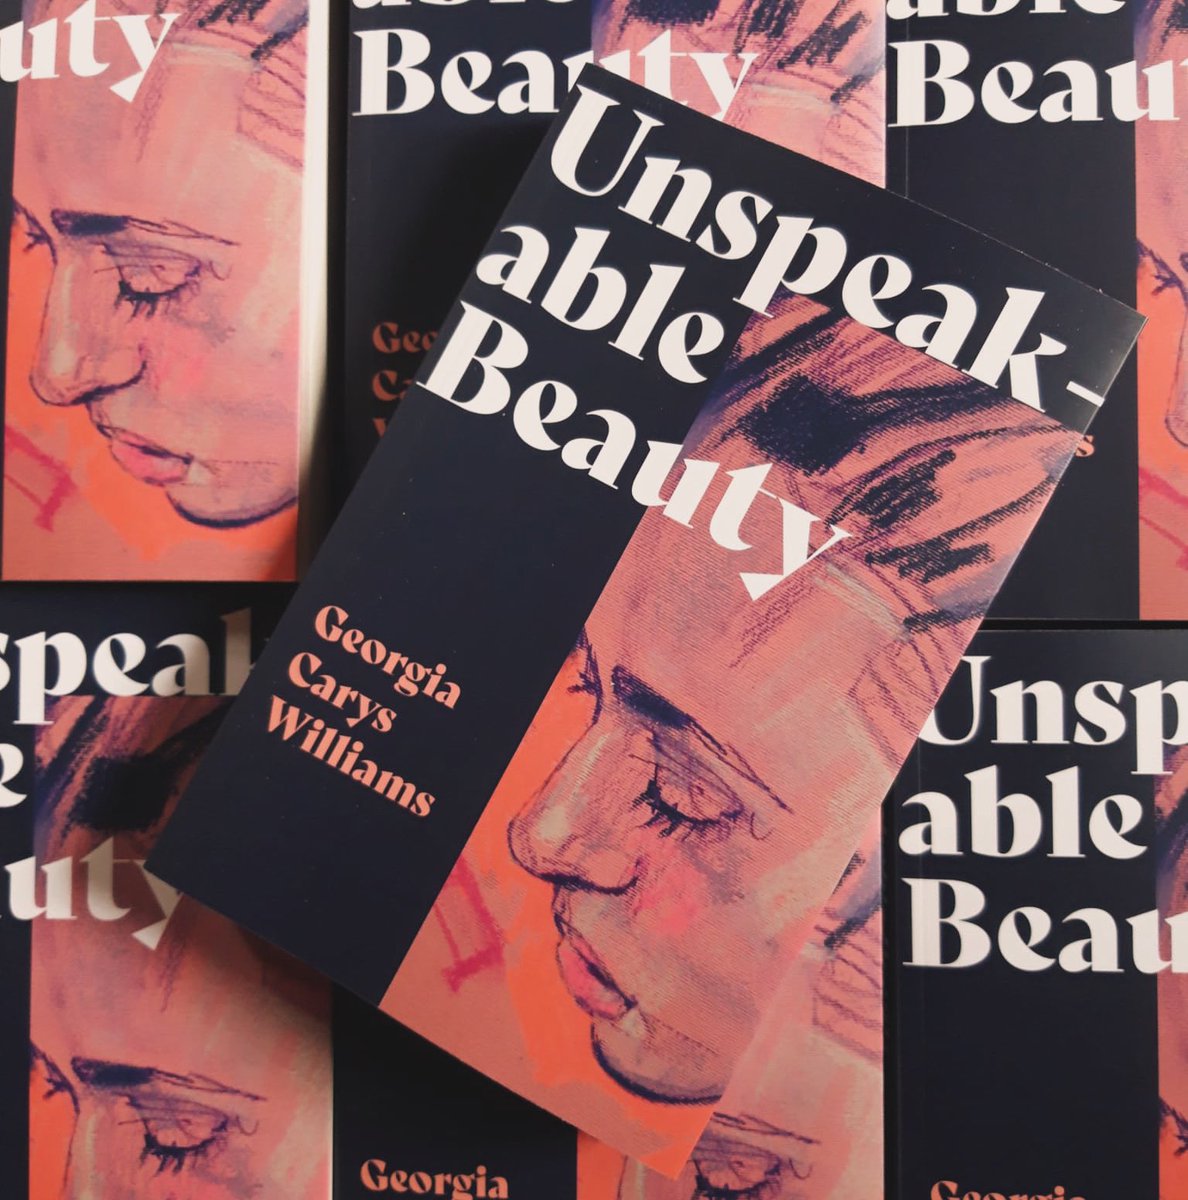 Have you picked up a copy of Unspeakable Beauty yet? 🩰🌺 This lyrical debut novel warns of the dangers of being a quiet person in a loud world and the importance of finding your voice. Out now by @GeorgiaCarys Williams! parthianbooks.com/products/unspe…